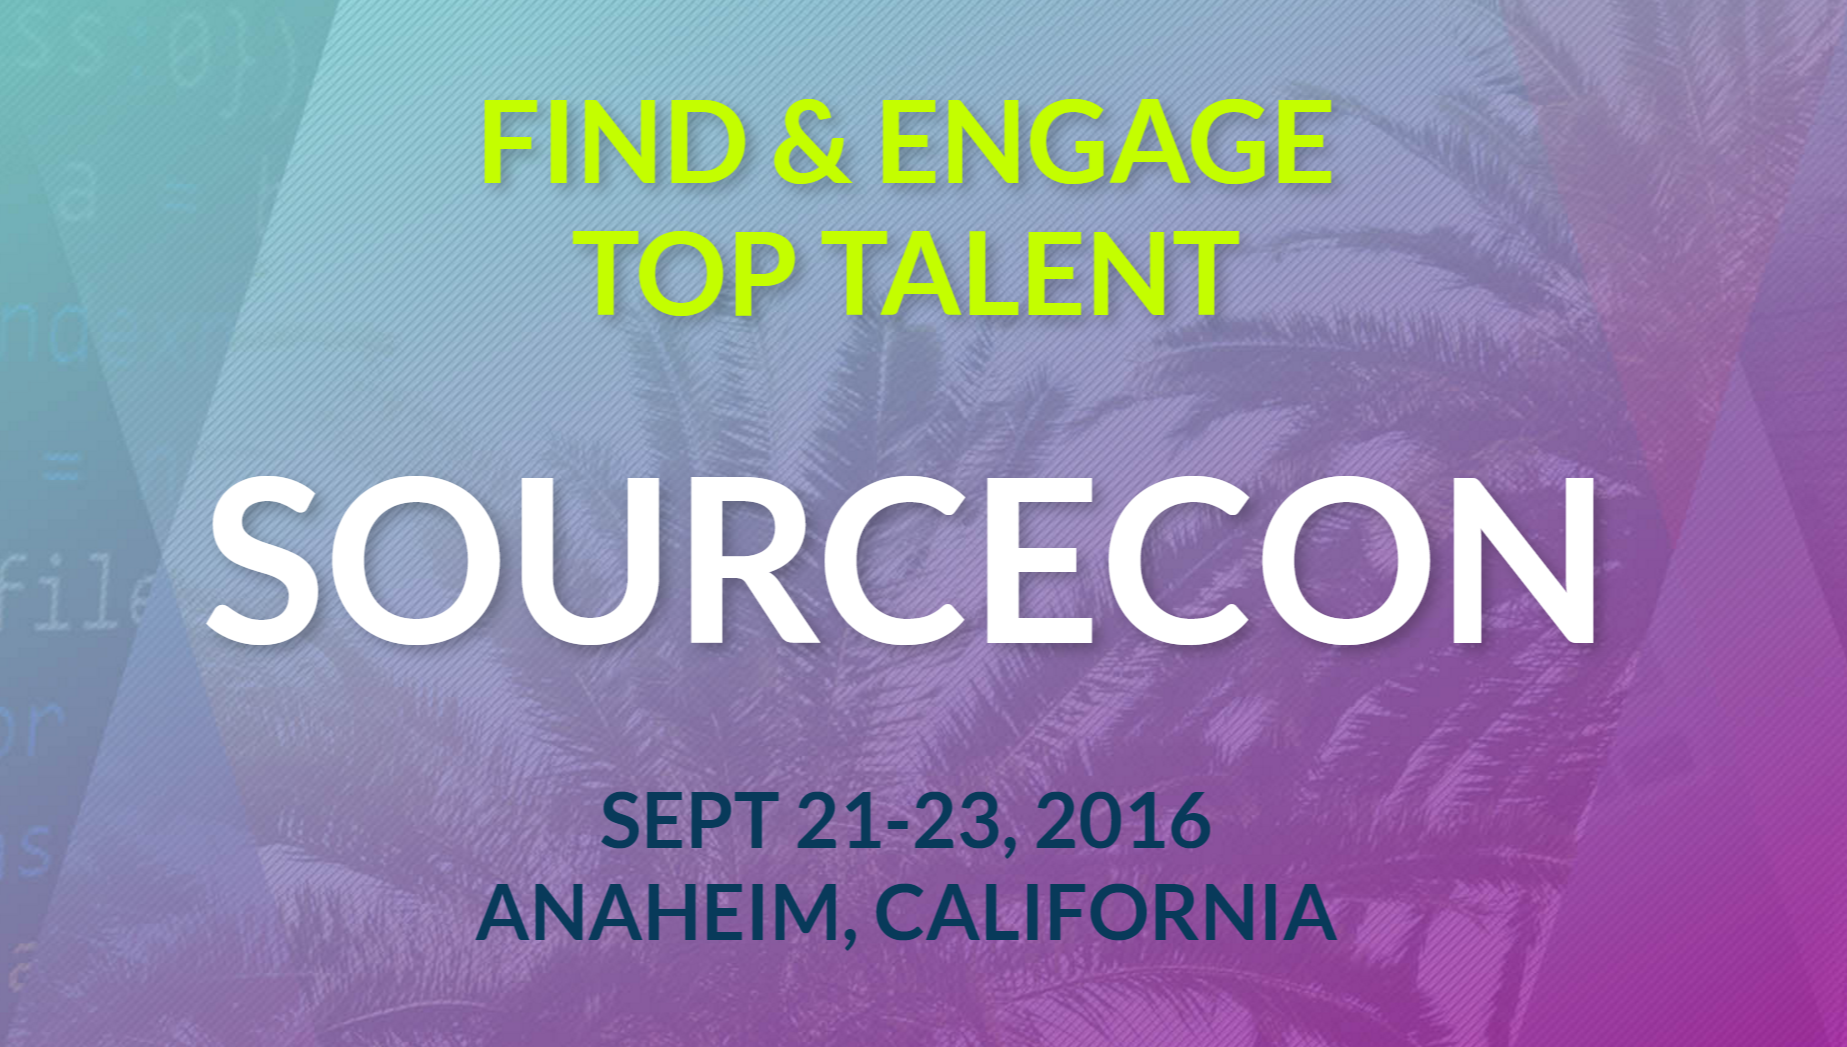 What To Expect When You Attend A SourceCon Conference SourceCon